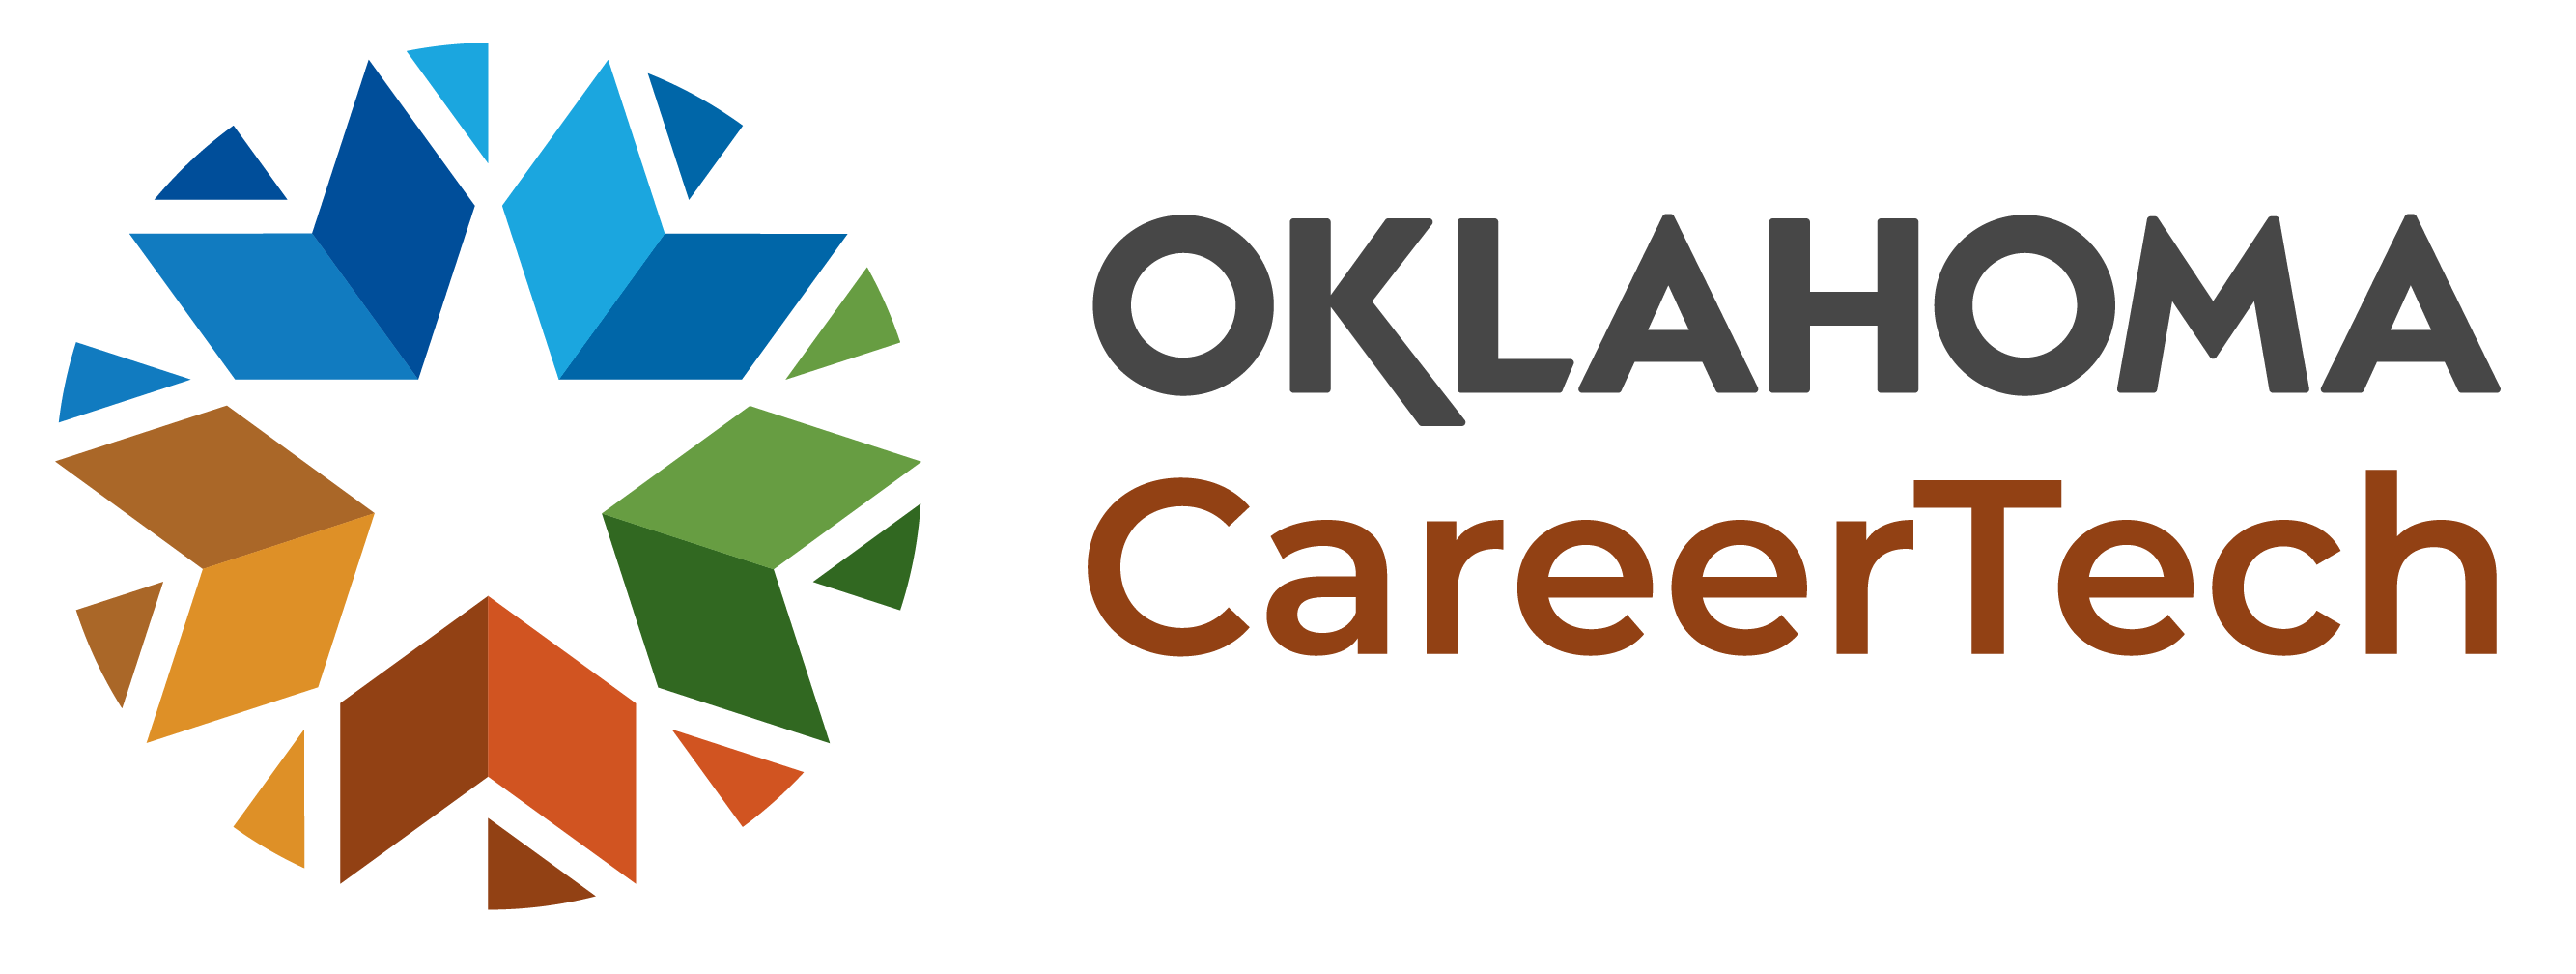 Oklahoma Department of Career and Technology Education logo